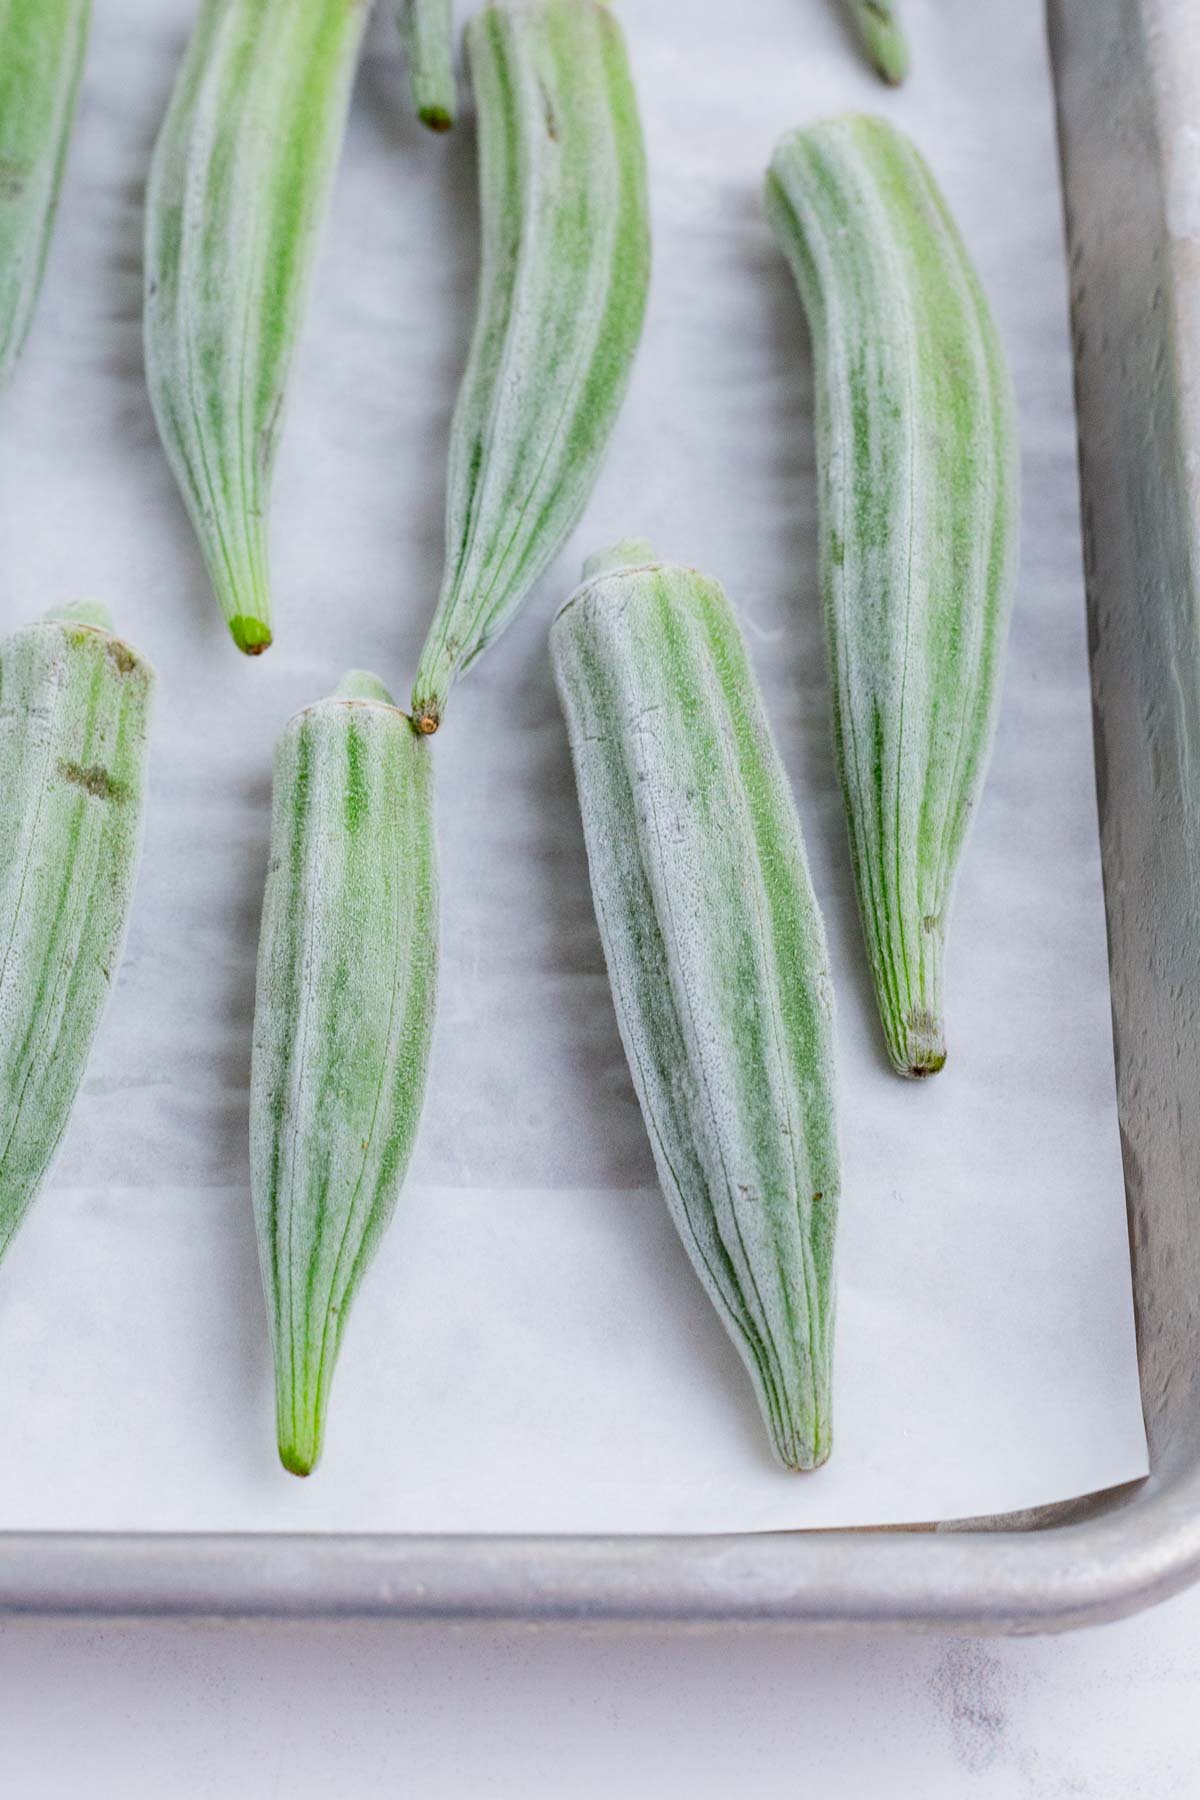 Freeze okra so you have this veggie ready to use year-round.